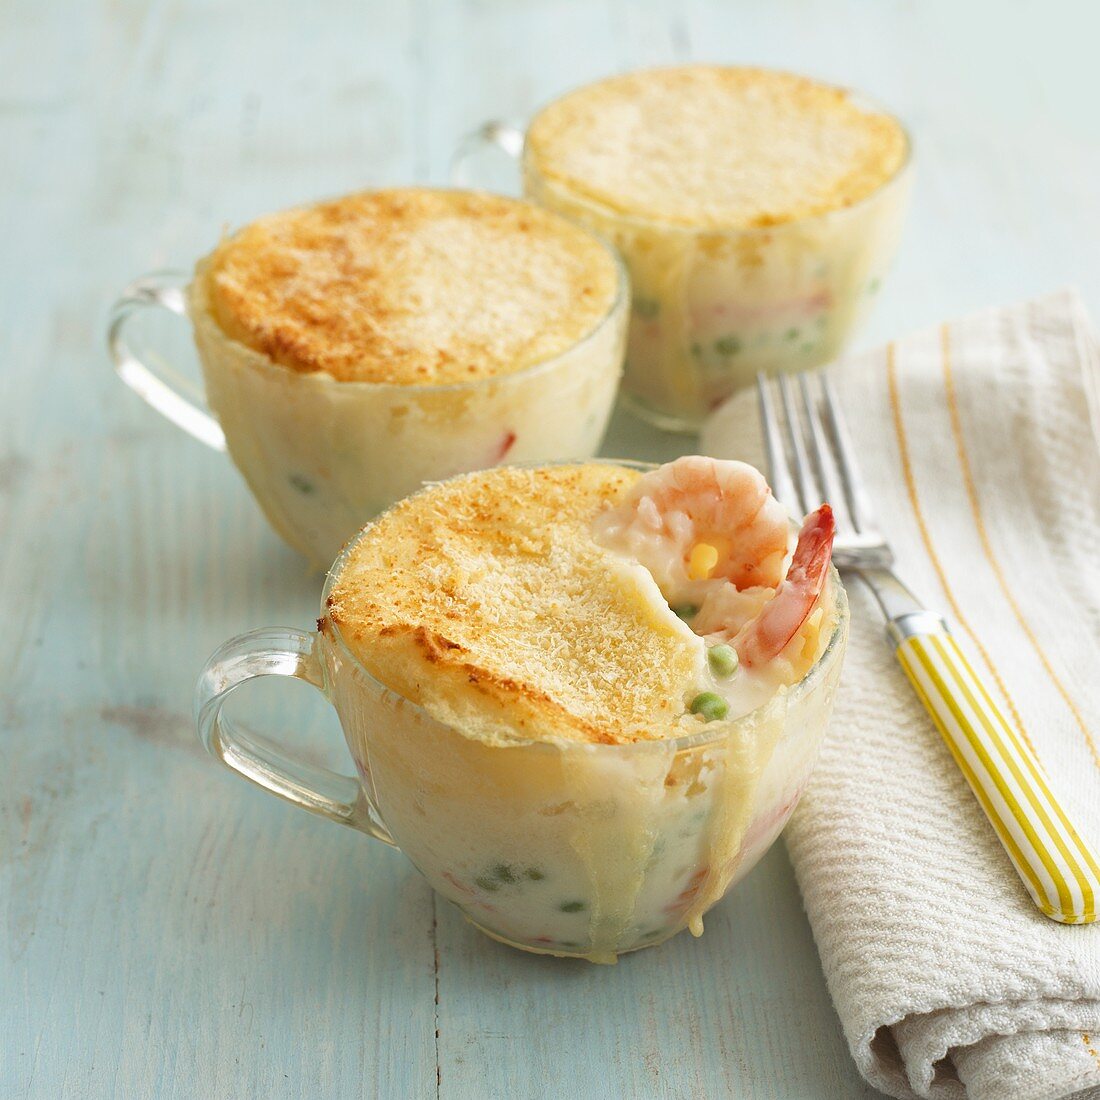 Prawn and pea pies in glass cups